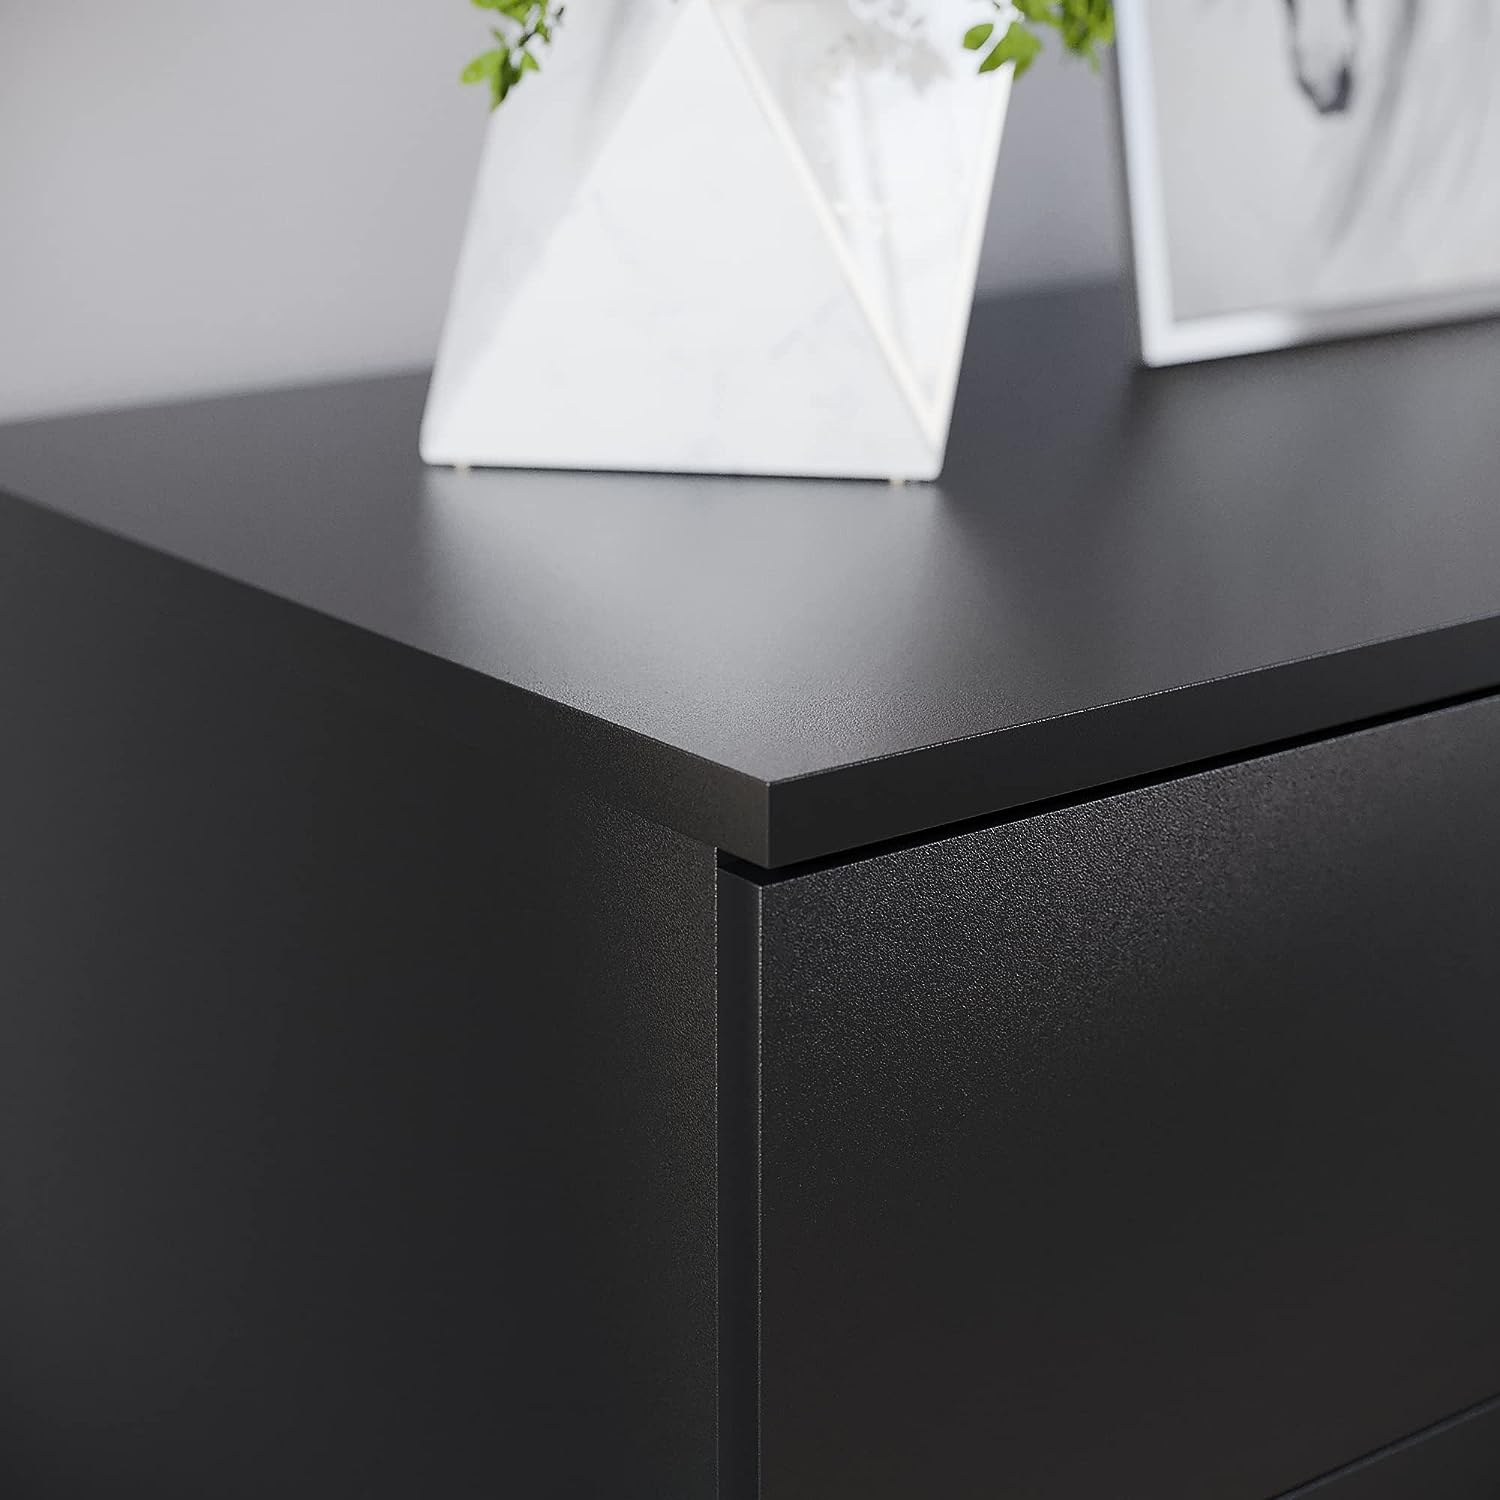 Vida Designs Black Chest of Drawers, 5 Drawer With Metal Handles and Runners, Unique Anti-Bowing Drawer Support, Riano Bedroom Furniture